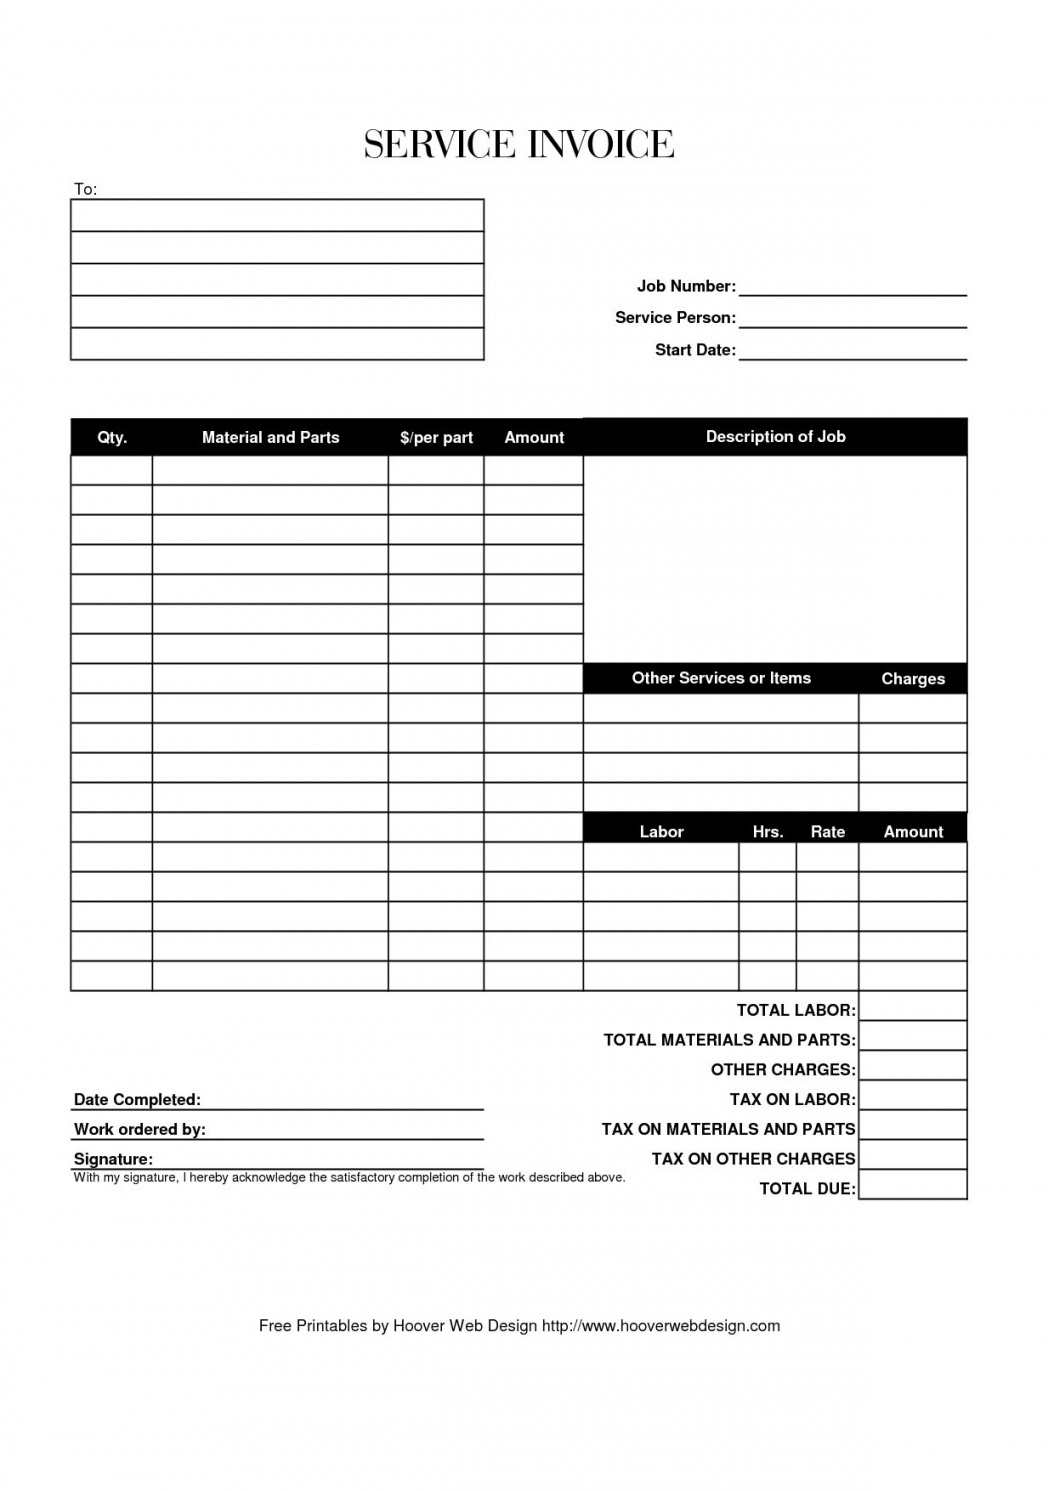 Job Invoice Example Bill Template Free Download Format - Free Printable Work Invoices